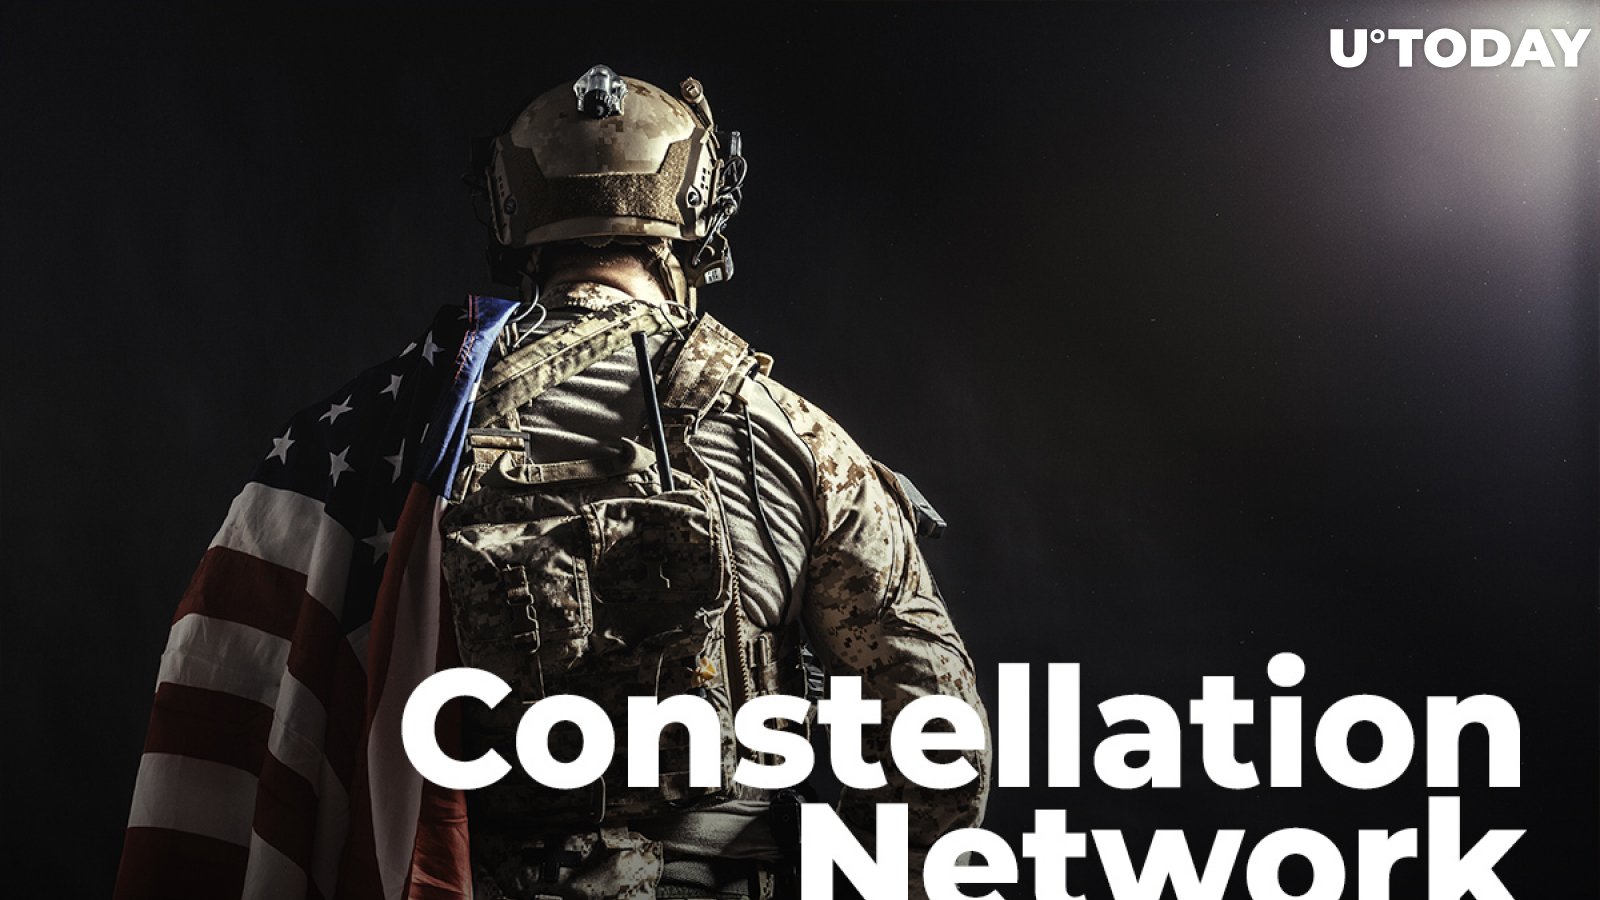 Constellation Network Chosen as Security Provider for U.S. Military Infrastructure